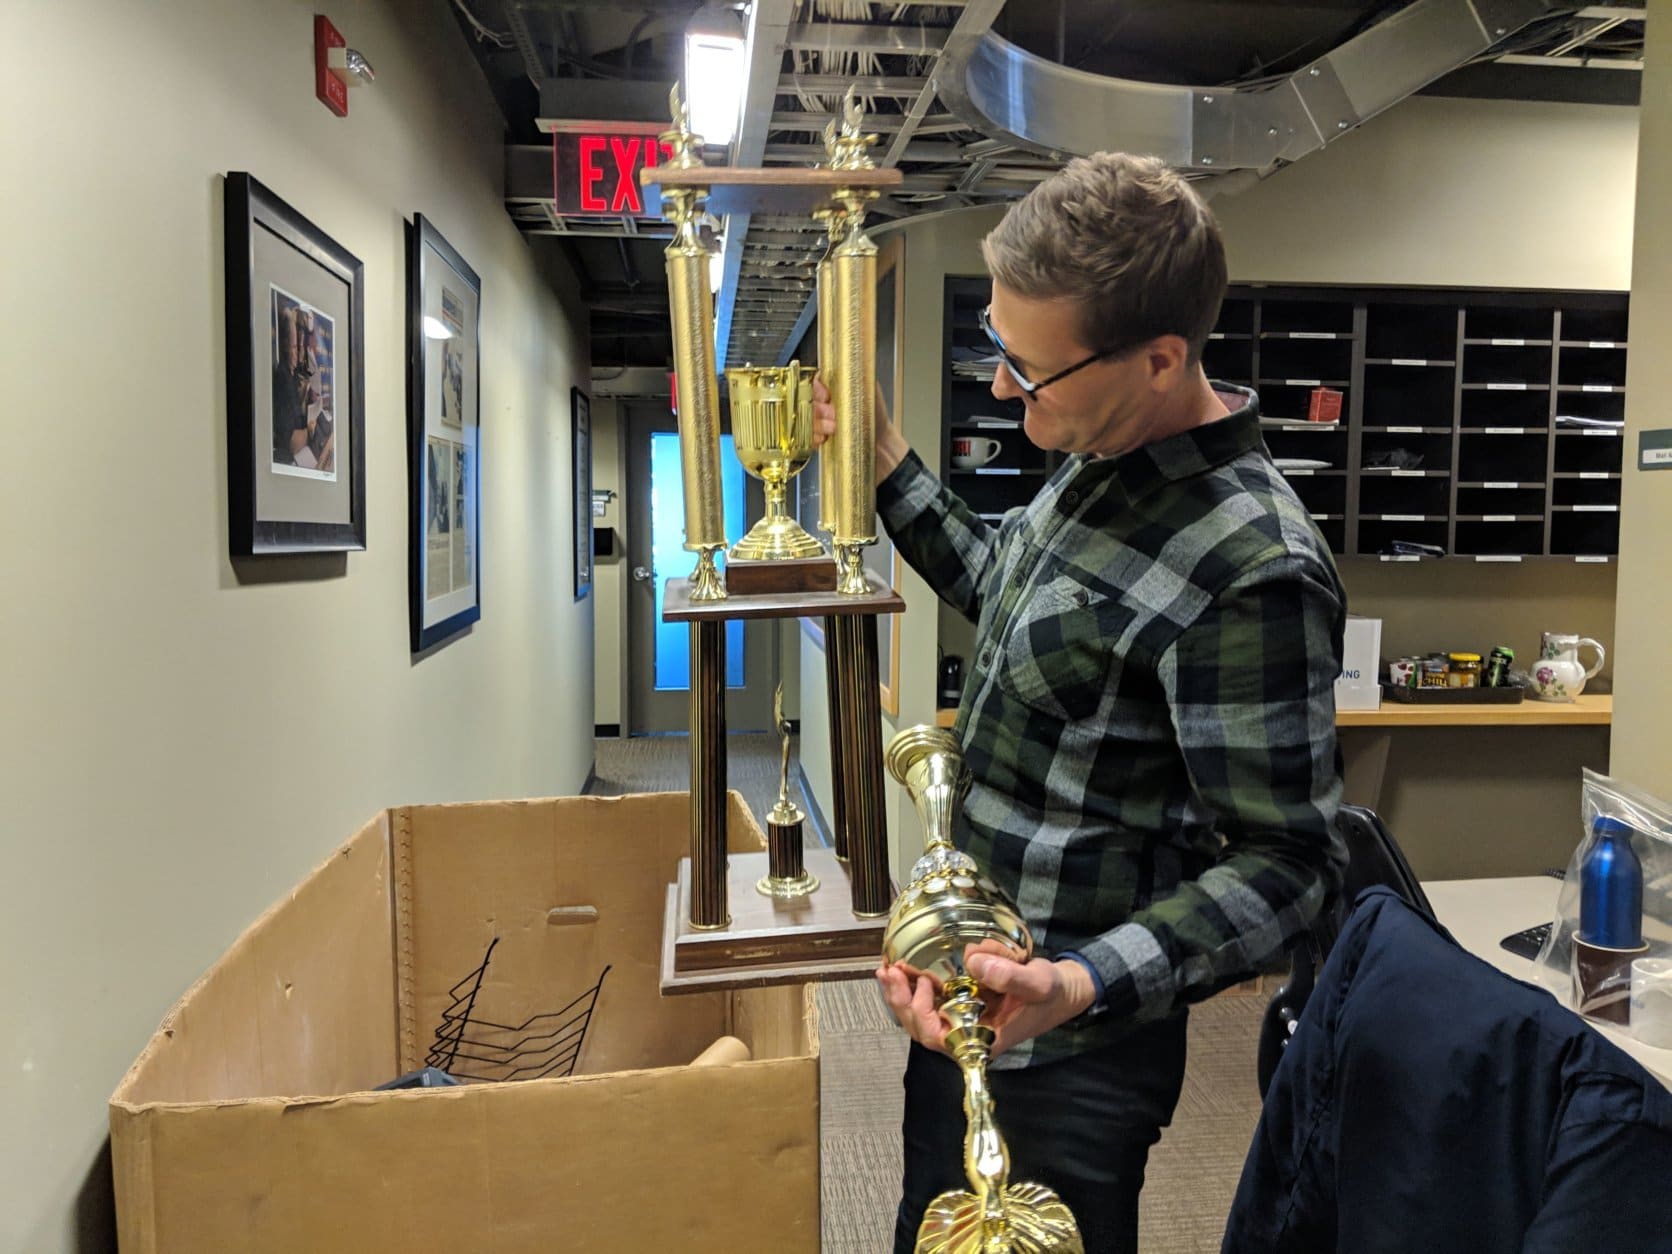 Much softball has been played, which means of course that many trophies have been won. Some needed a good home. Kyle Cooper claimed one for reasons he wasn't willing to discuss just yet. (WTOP/Jack Pointer)